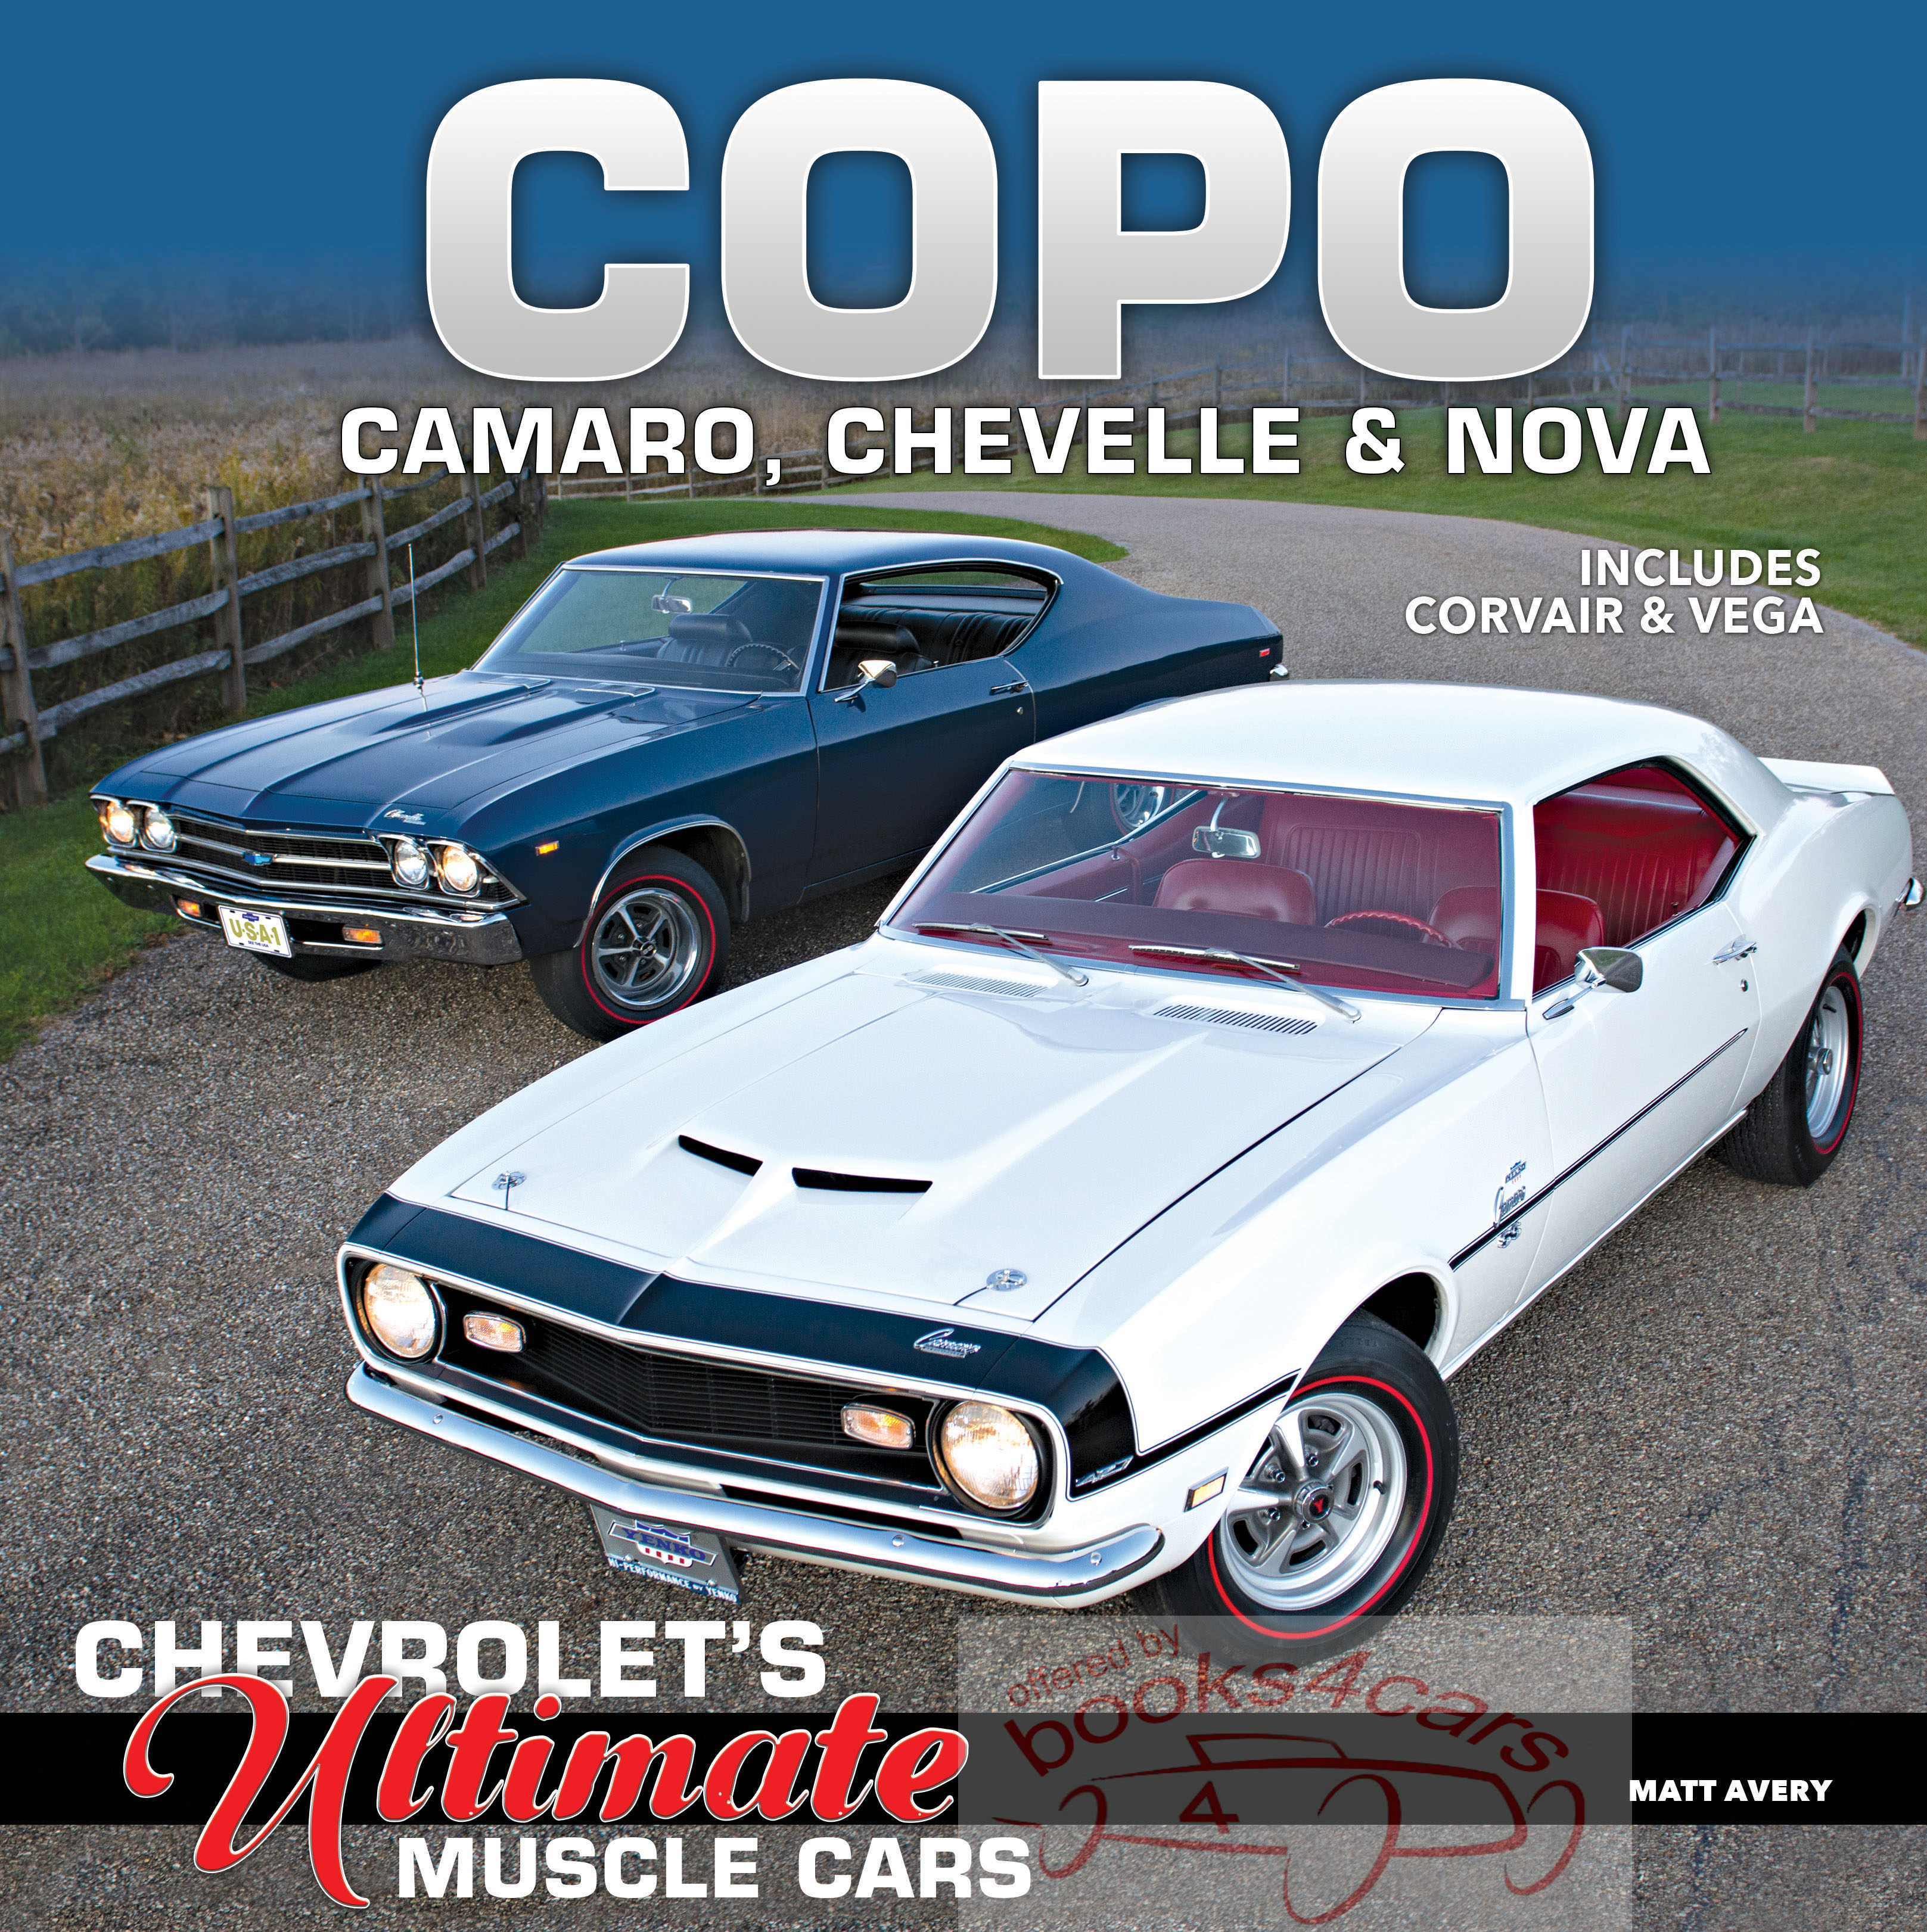 COPO: Camaro Chevelle & Nova Chevrolet's Muscle Cars by M Avery 204 pages with over 400 photos